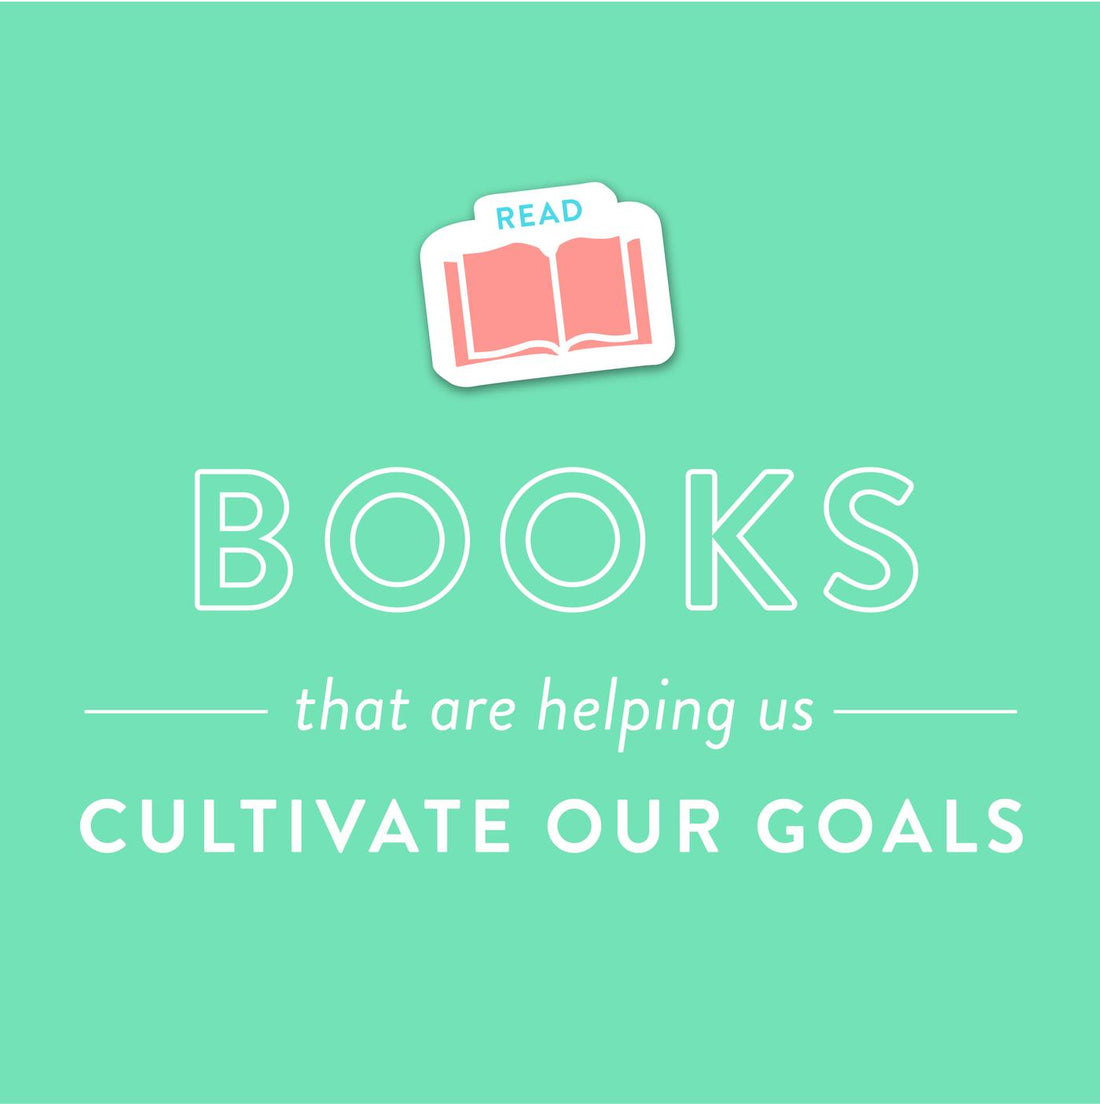 What We're Reading to Cultivate Our Goals